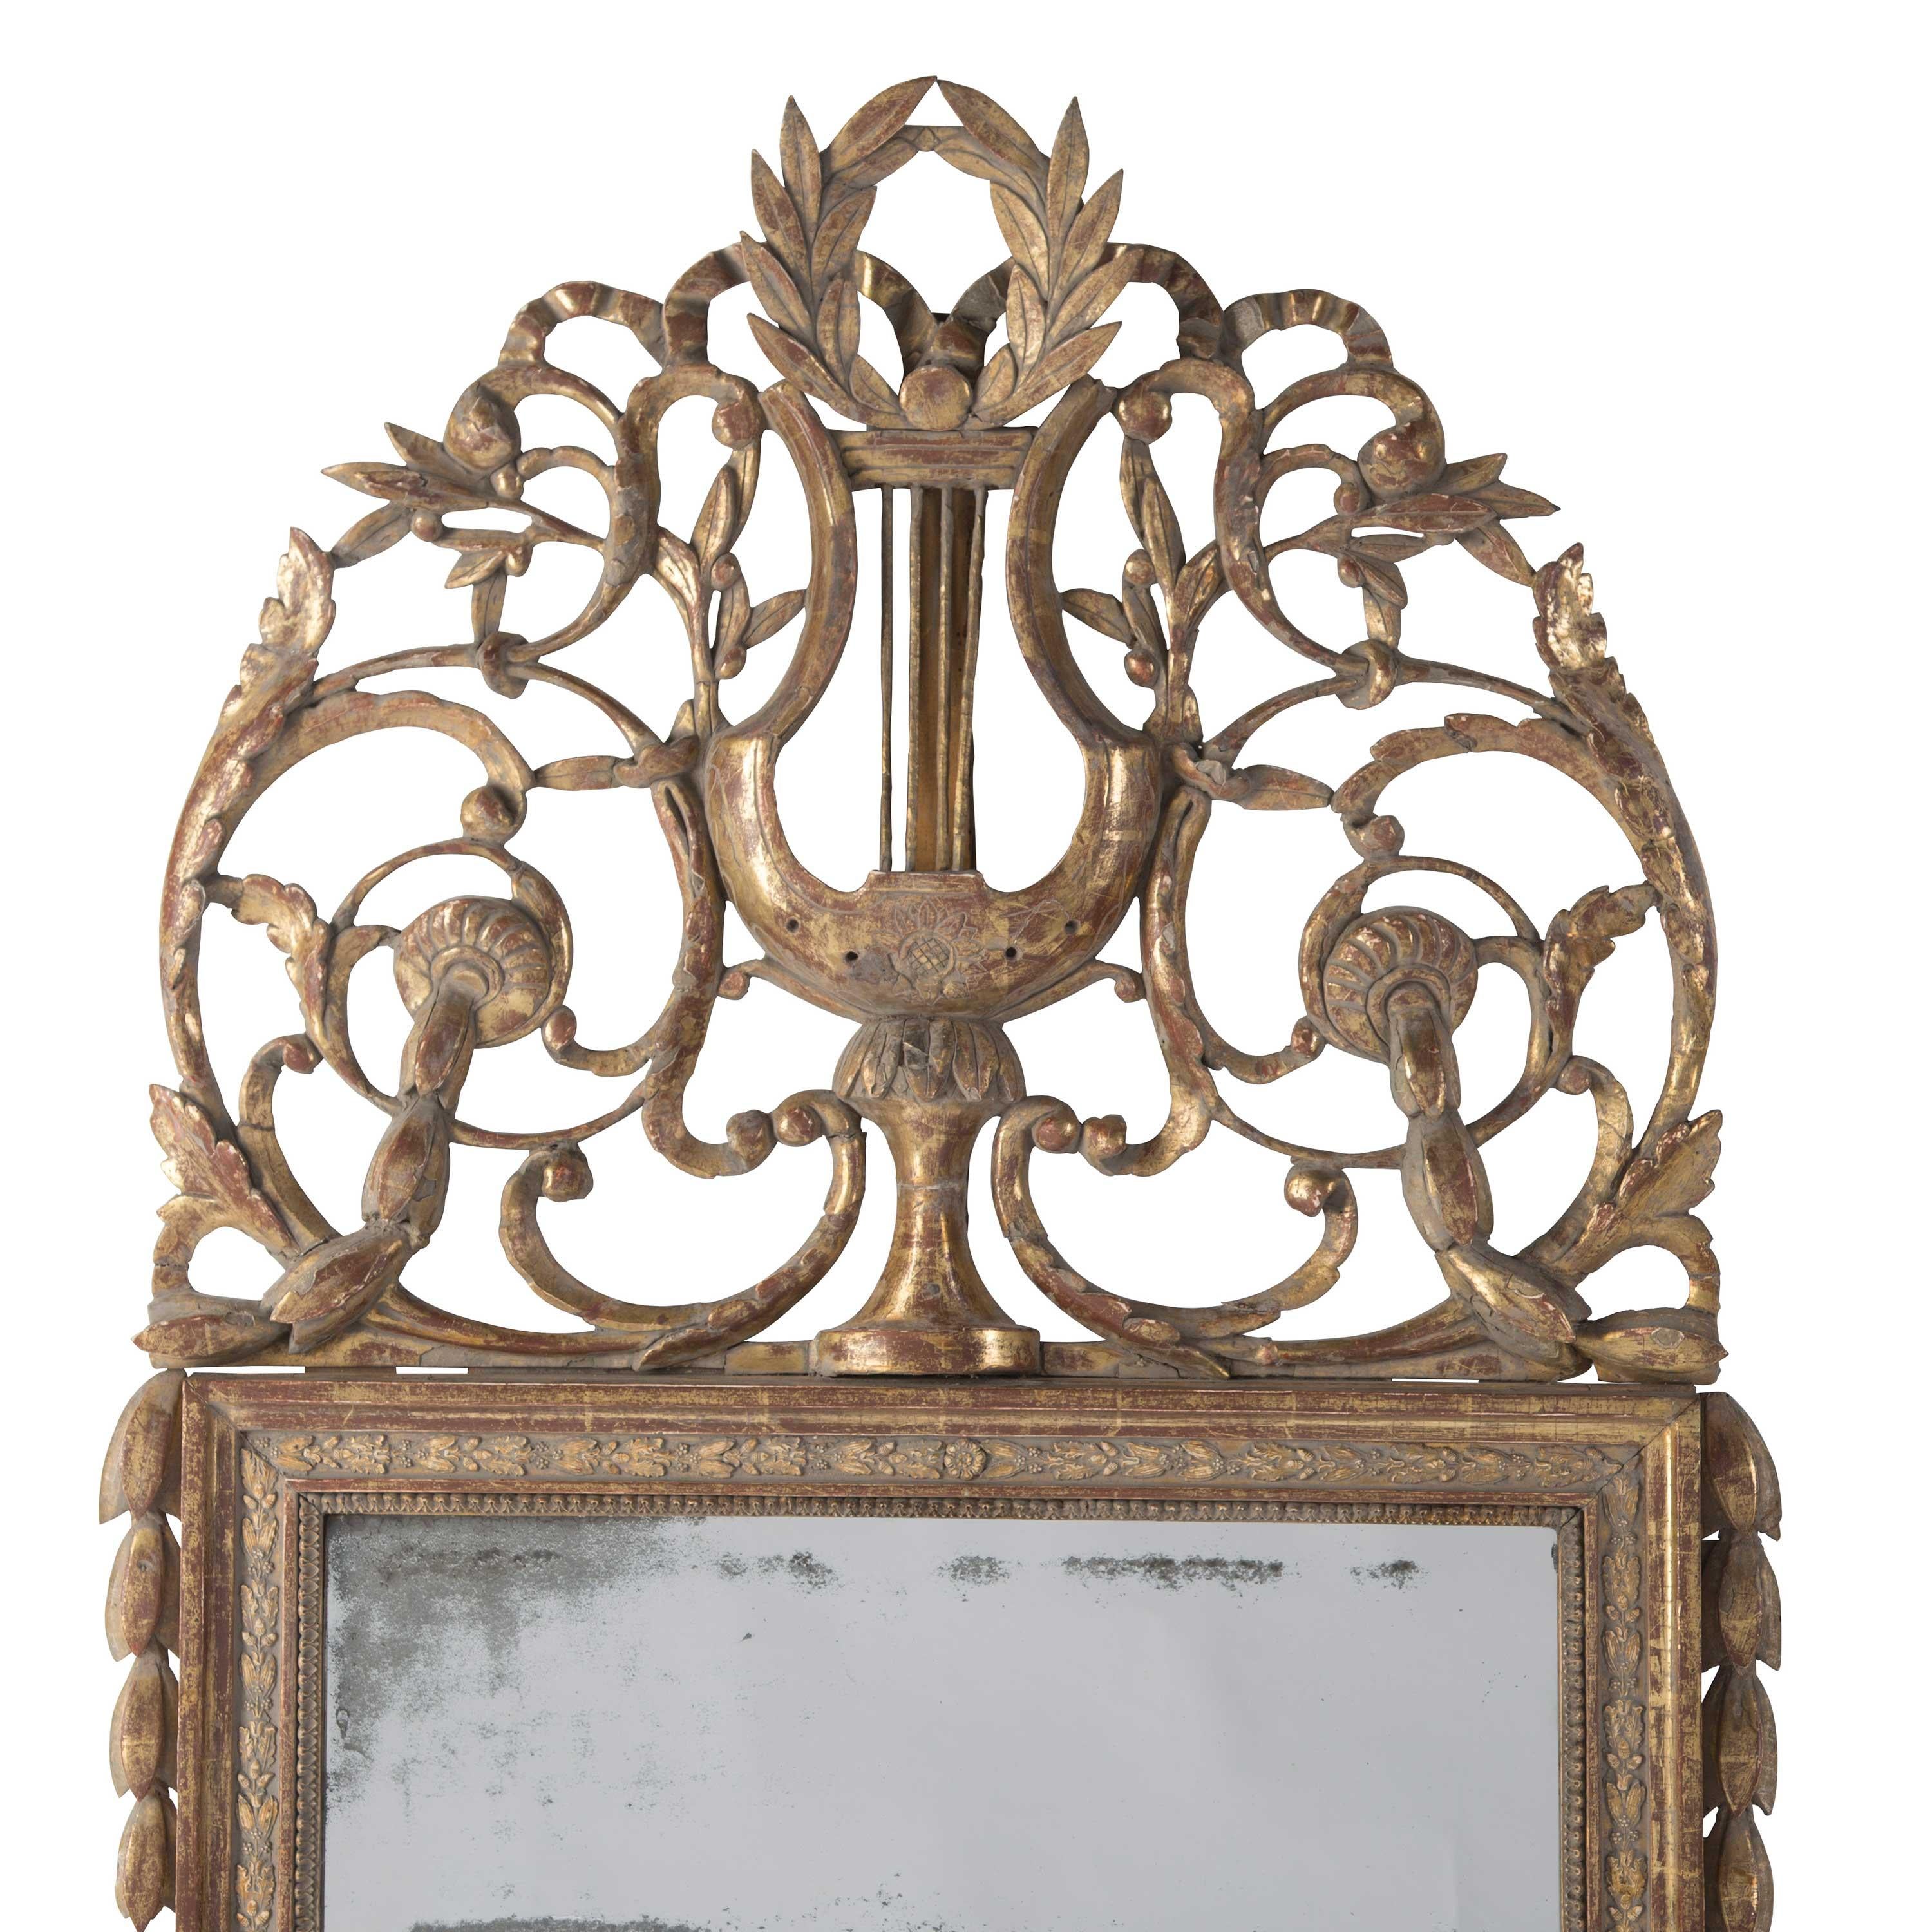 An exceptional mid-18th century French gilded and crested mirror in original condition.